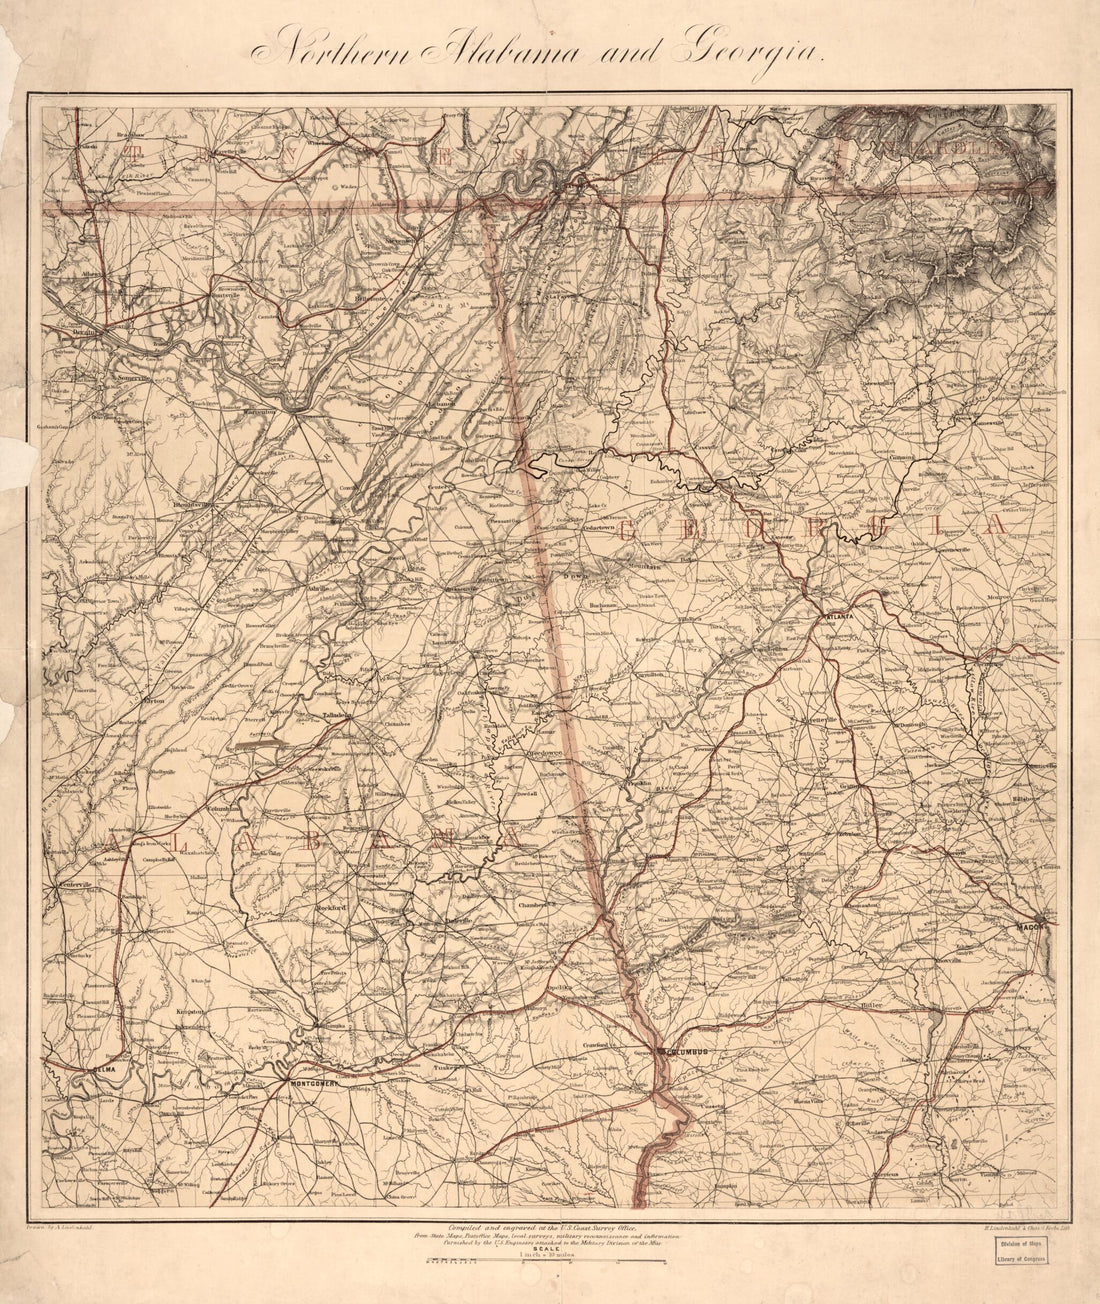 This old map of Northern Alabama and Georgia from 1864 was created by Charles G. Krebs, A. Lindenkohl, H. (Henry) Lindenkohl,  United States Coast Survey in 1864